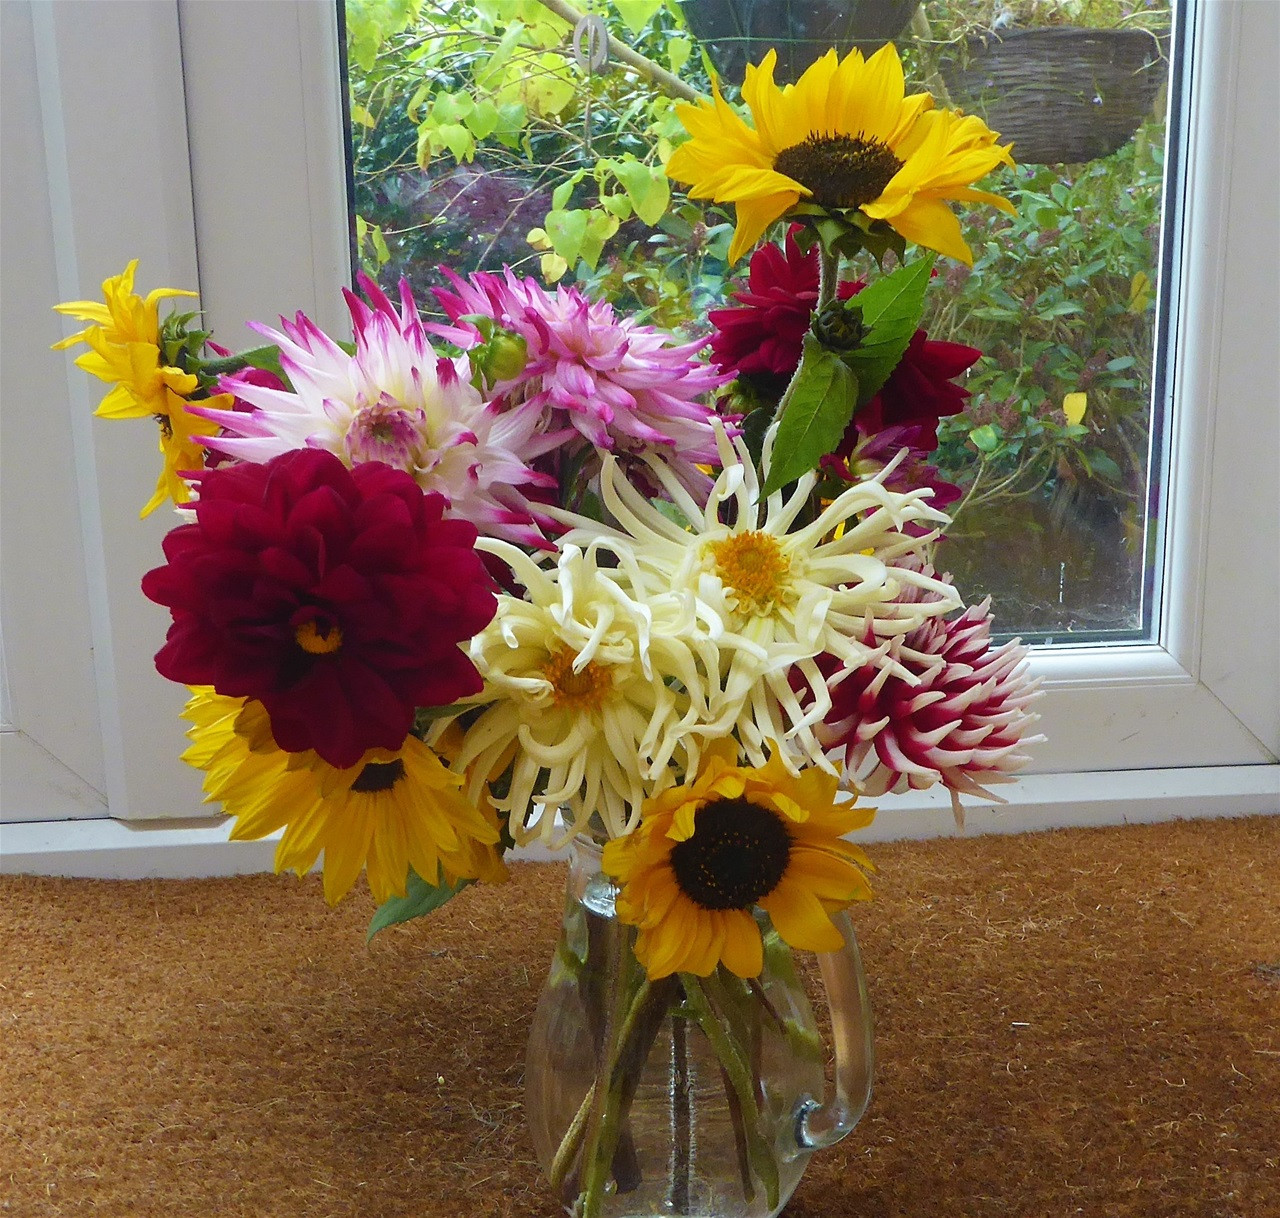 yellow smiley face vase of october 2017 www alittlebitofsunshine co uk pertaining to and last of all here is a vase of the flowers i cut as we left the plot earlier they have not been arranged just put in the vase temporarily as our